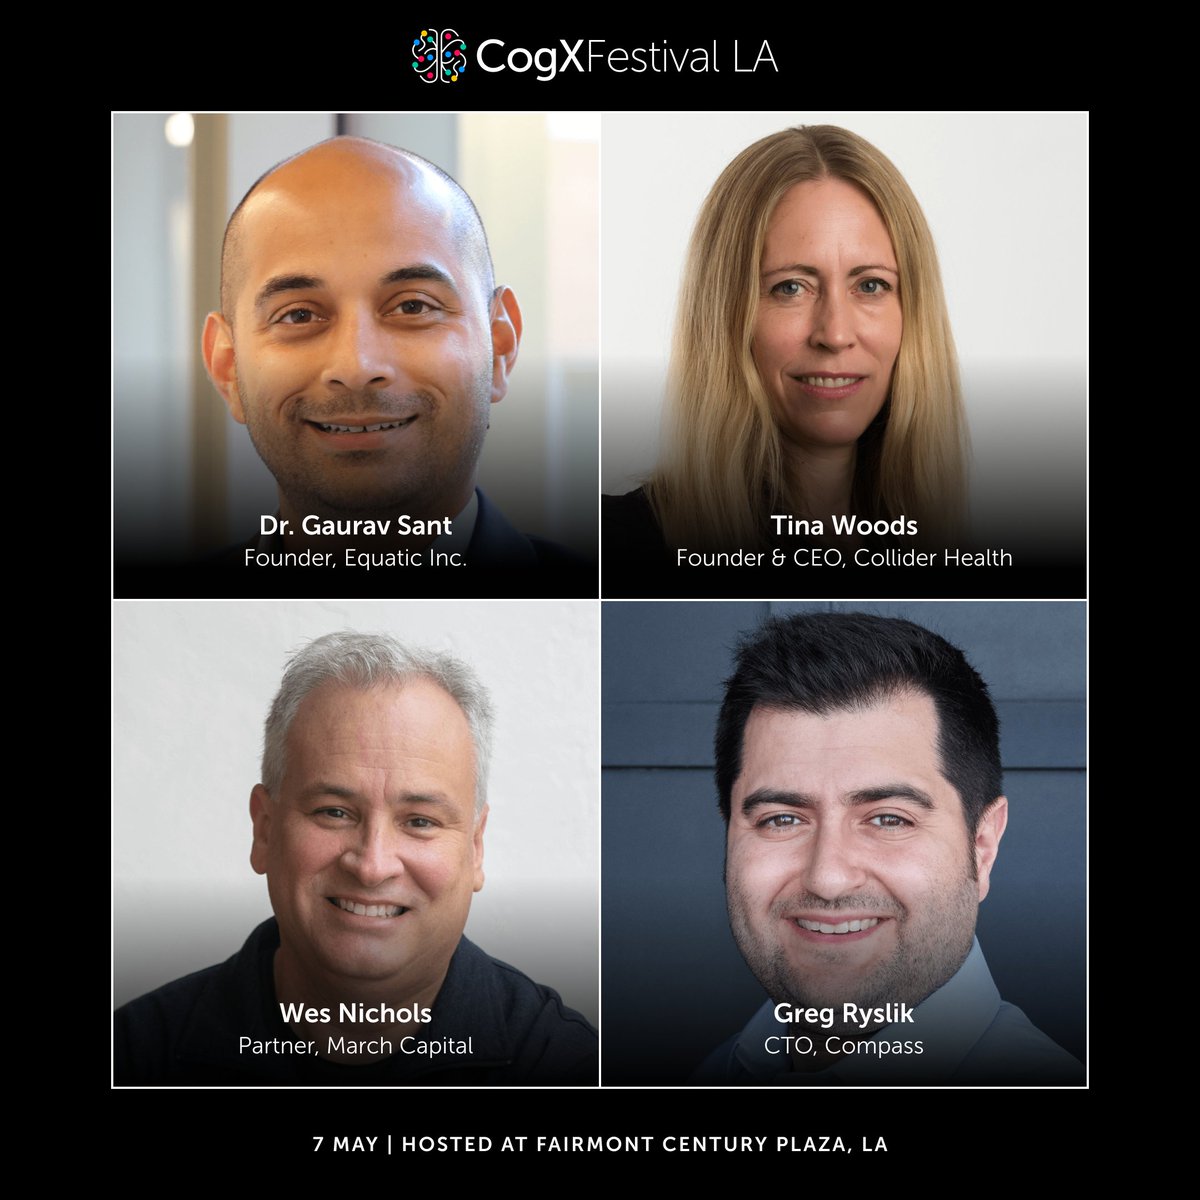 (1/2) New #CogXFestivalUSA speakers! Welcome Dr. Gaurav Sant, professor of sustainability, @TinaWoods, social entrepreneur & system architect, @wesnichols, tech entrepreneur & investor, and Greg Ryslik, data scientist & AI researcher. We look forward to hearing your insights.